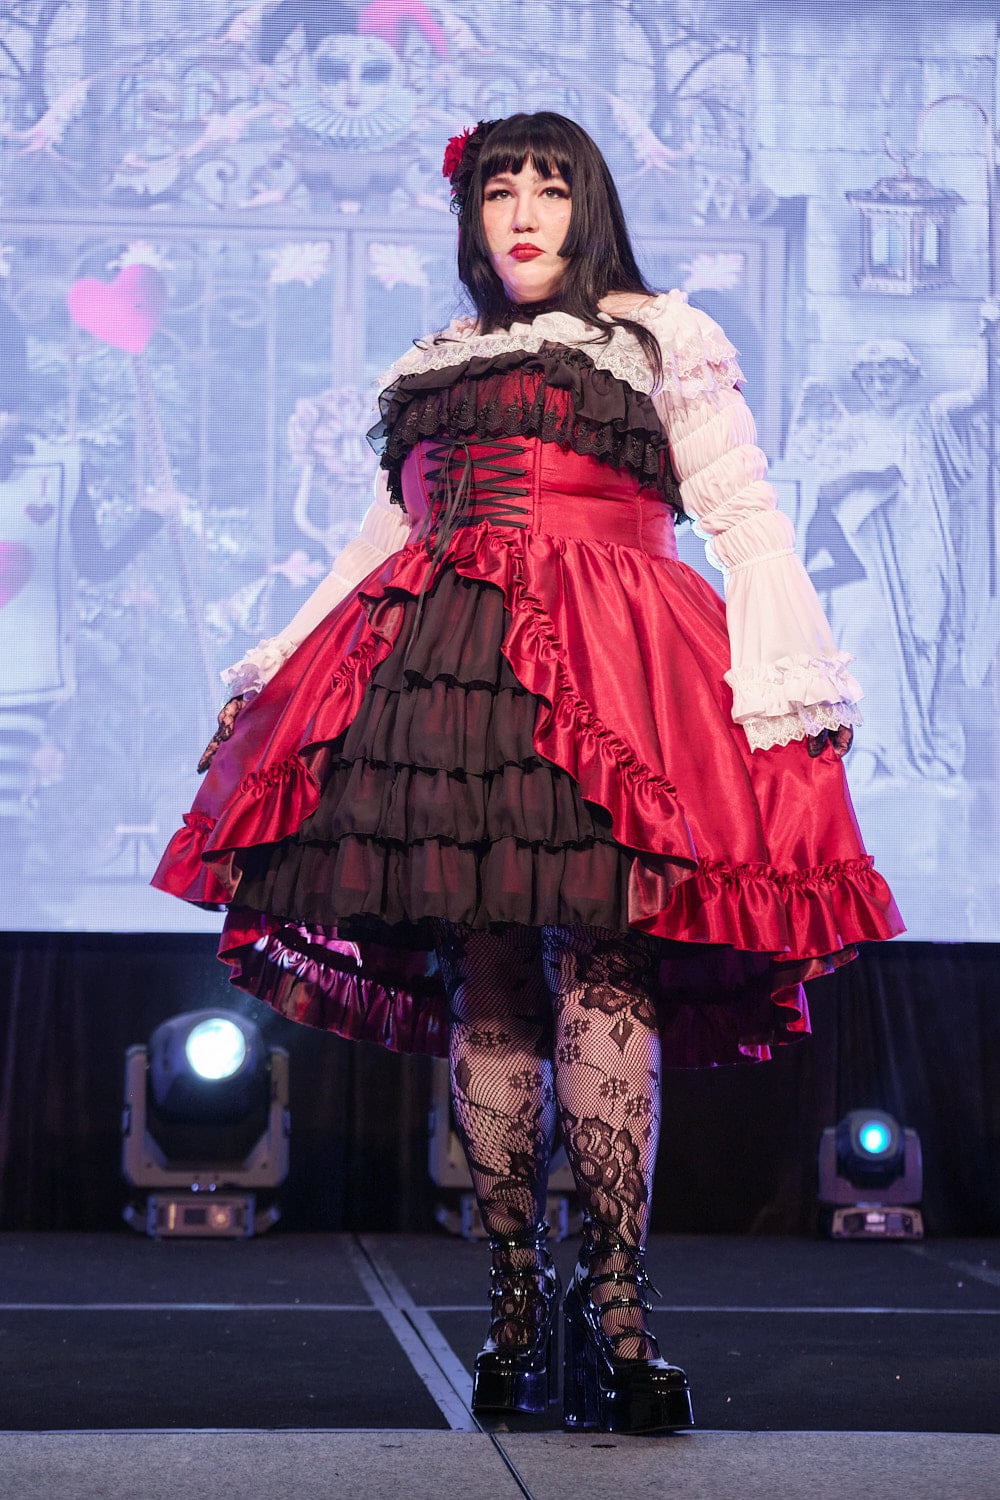 Plus size gothic lolita wearing red and black shantung bustle dress with white princess sleeve blouse, lace tights, and black shoes - full body 1.